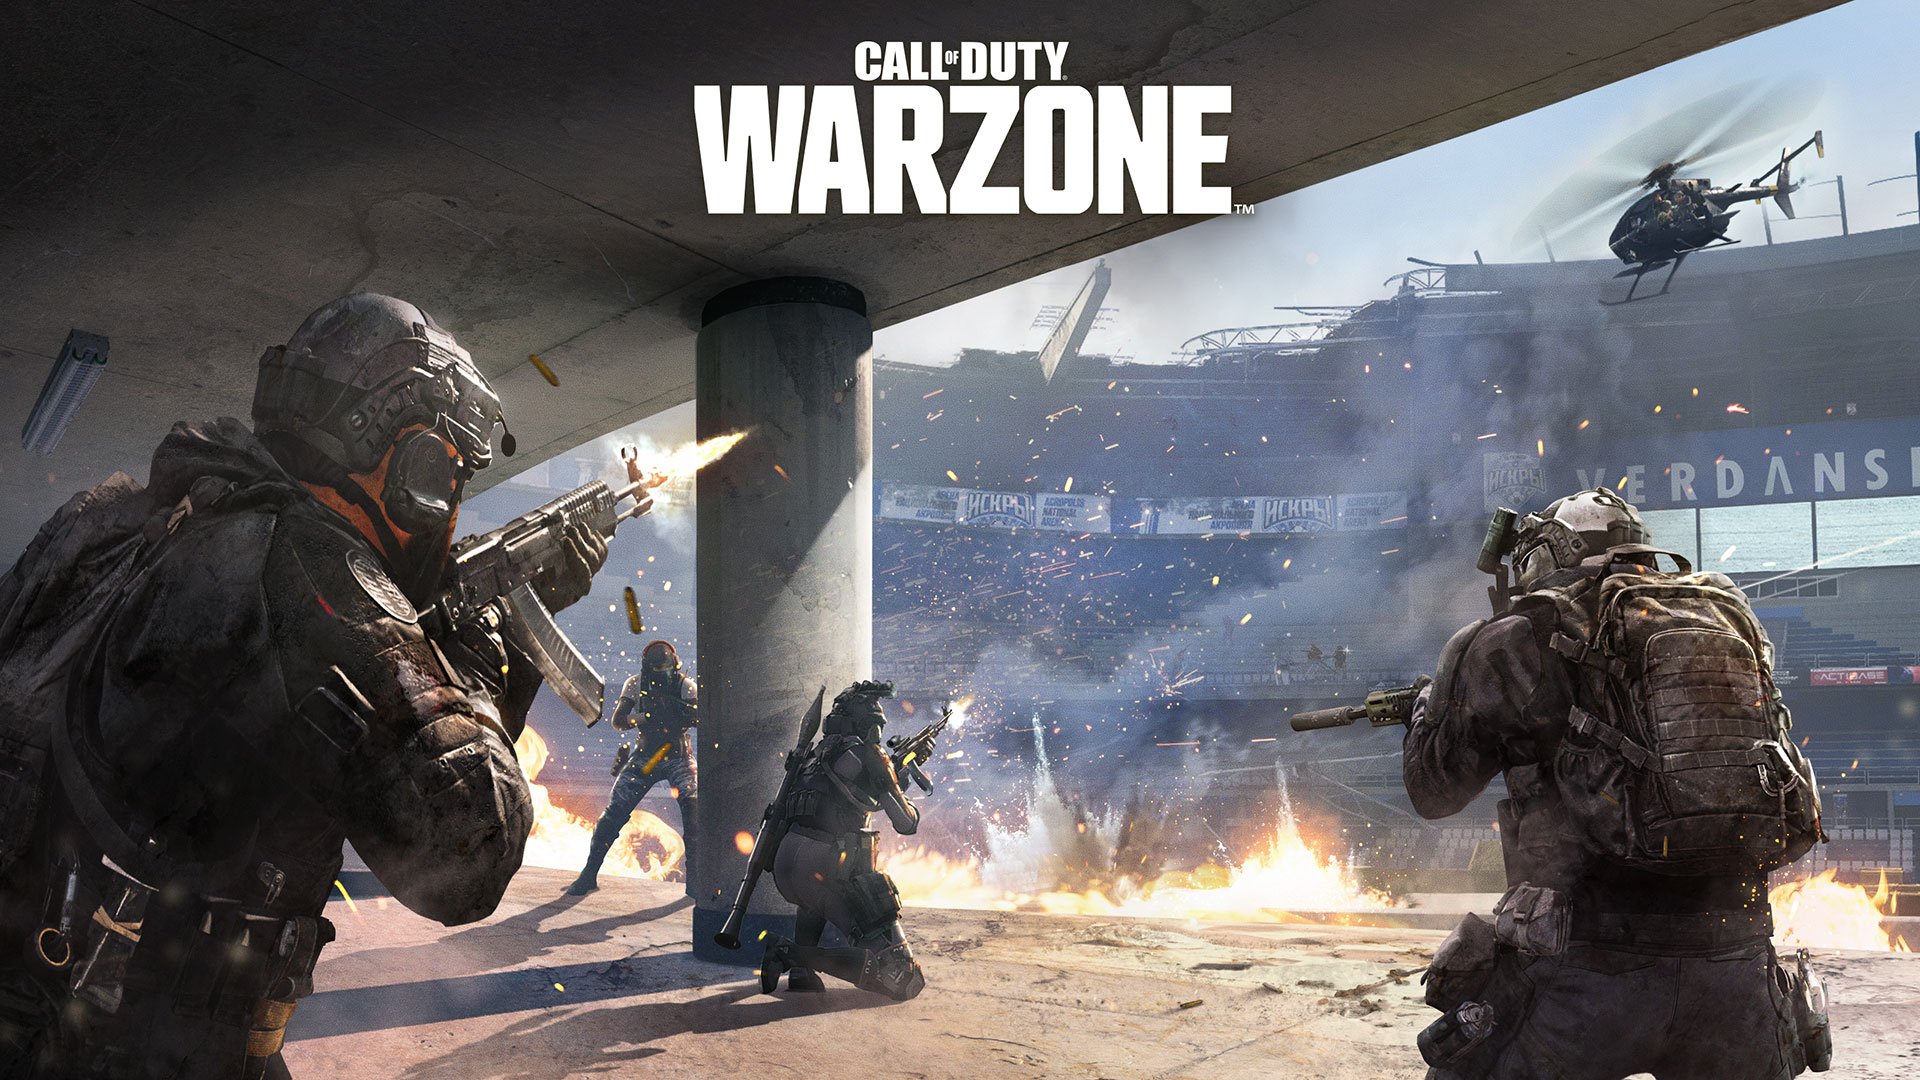 call of duty warzone apk